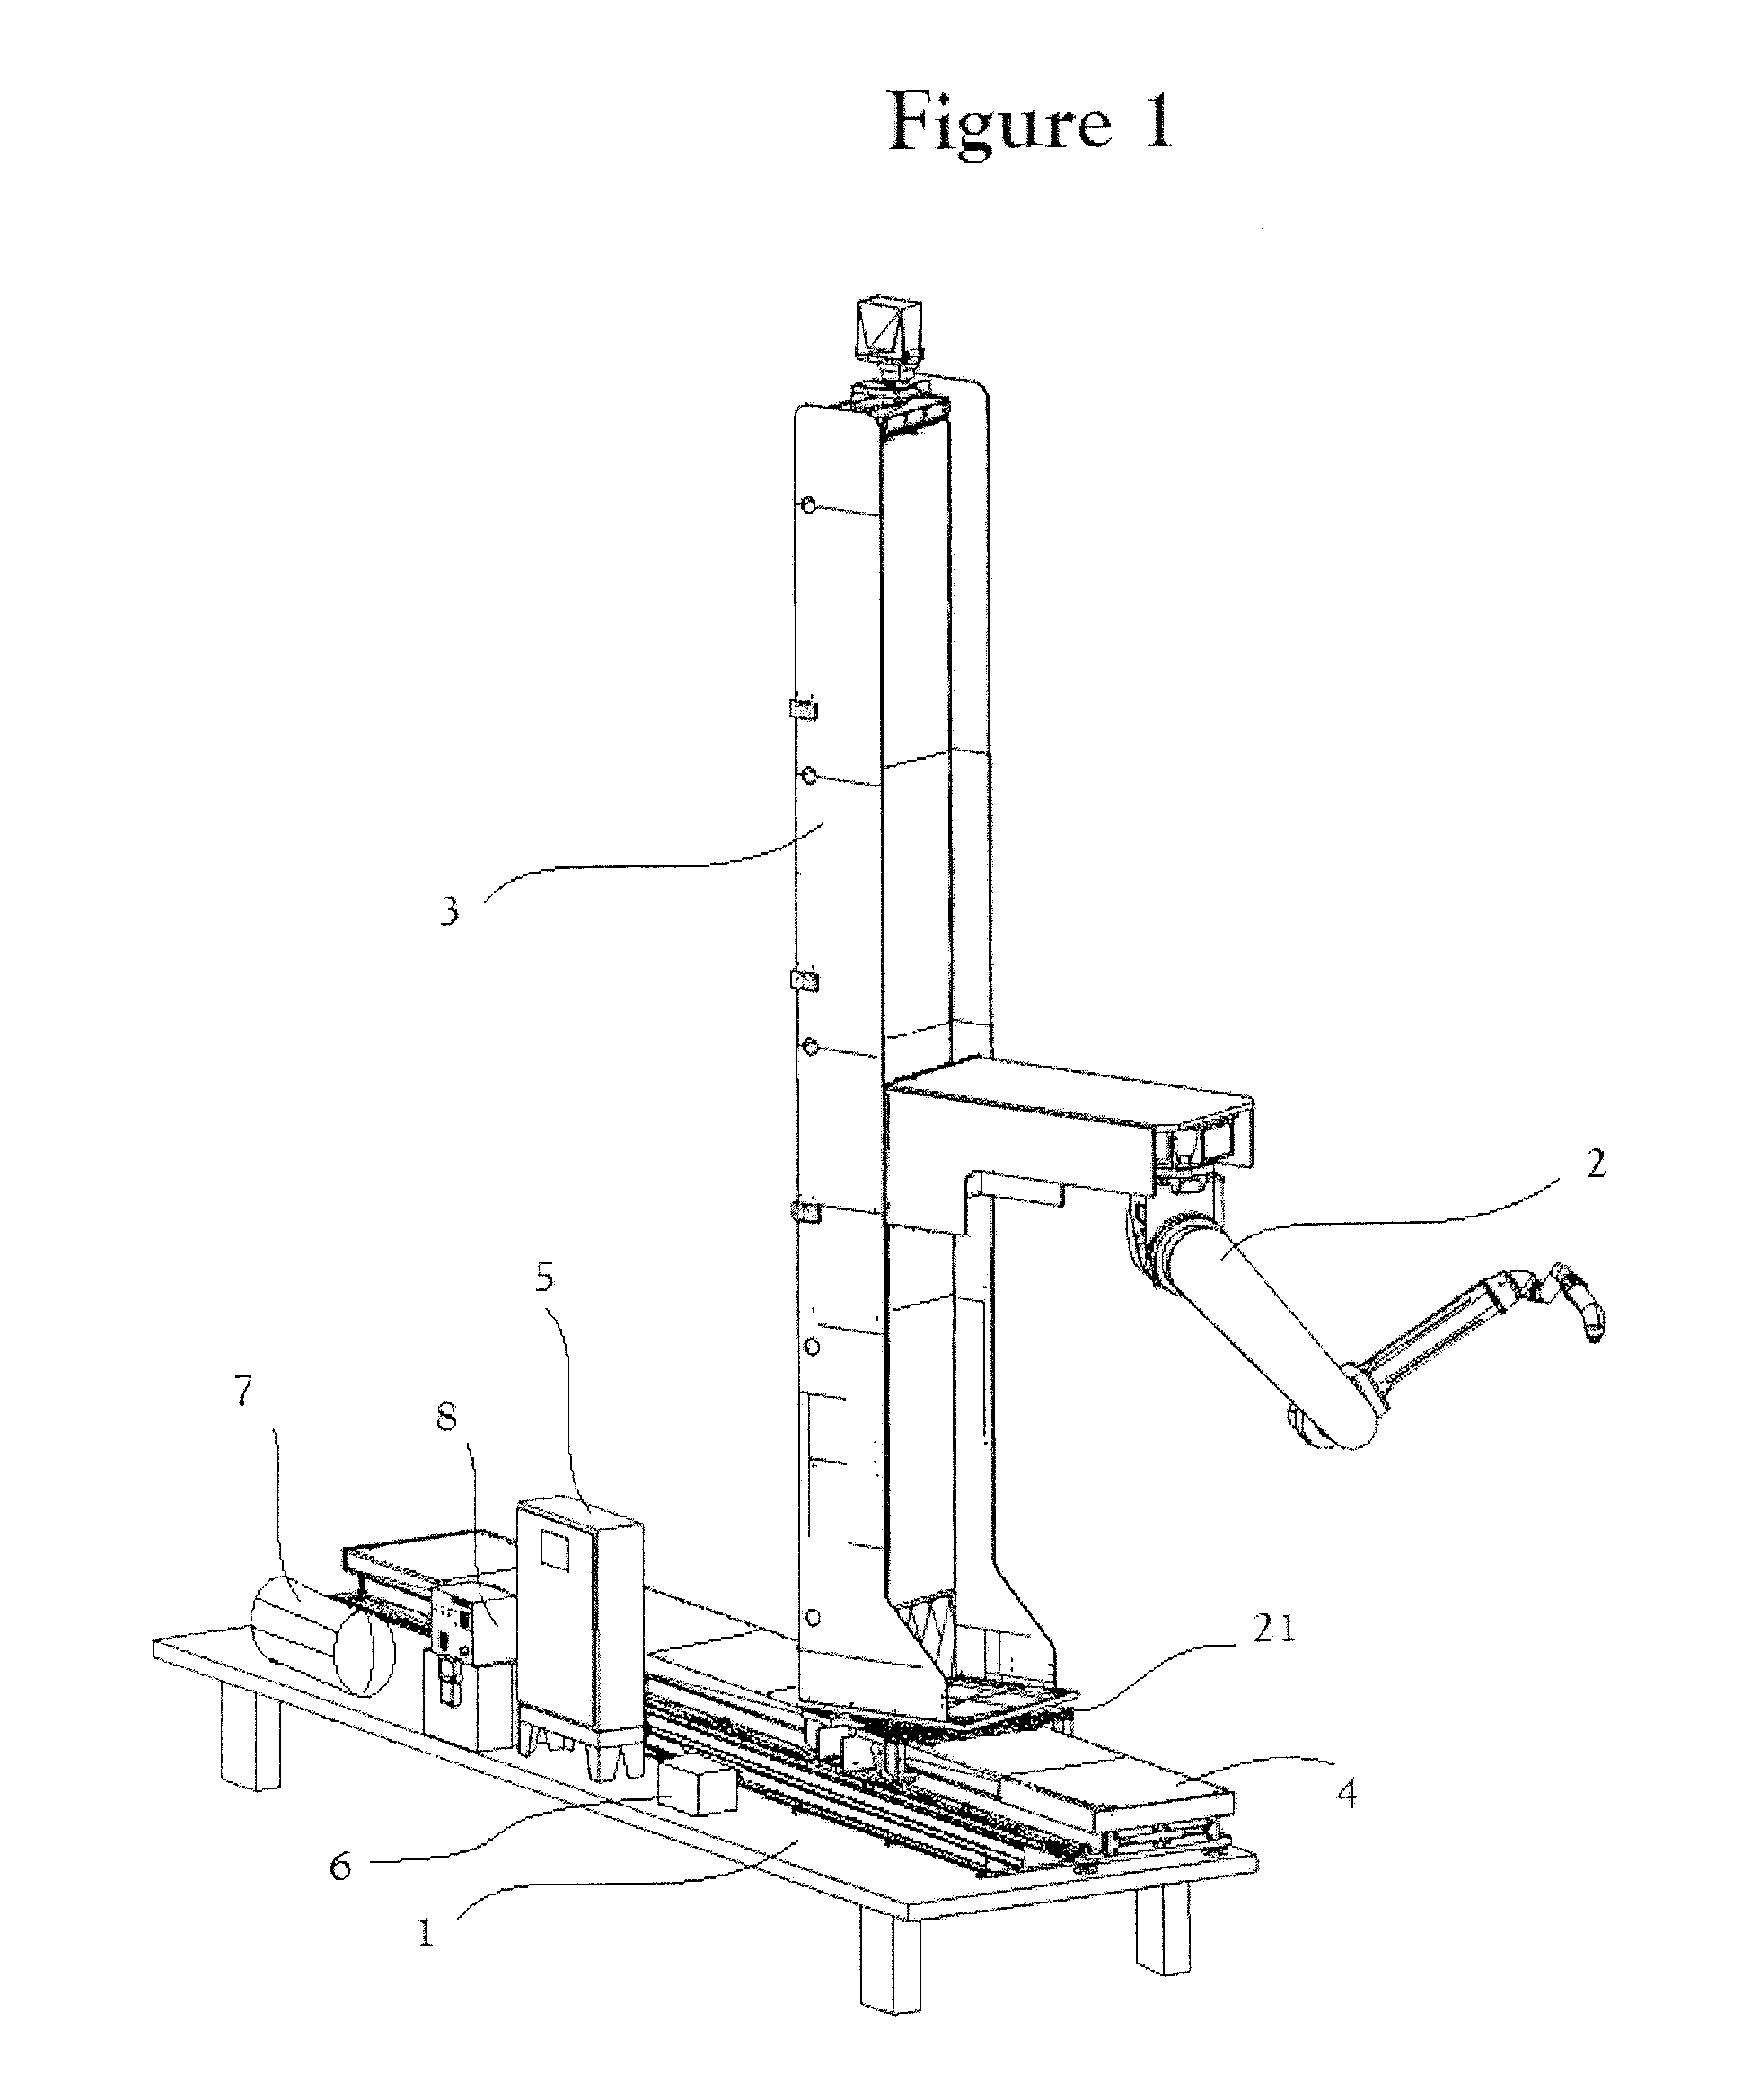 Robotic system for applying surface finishes to large objects